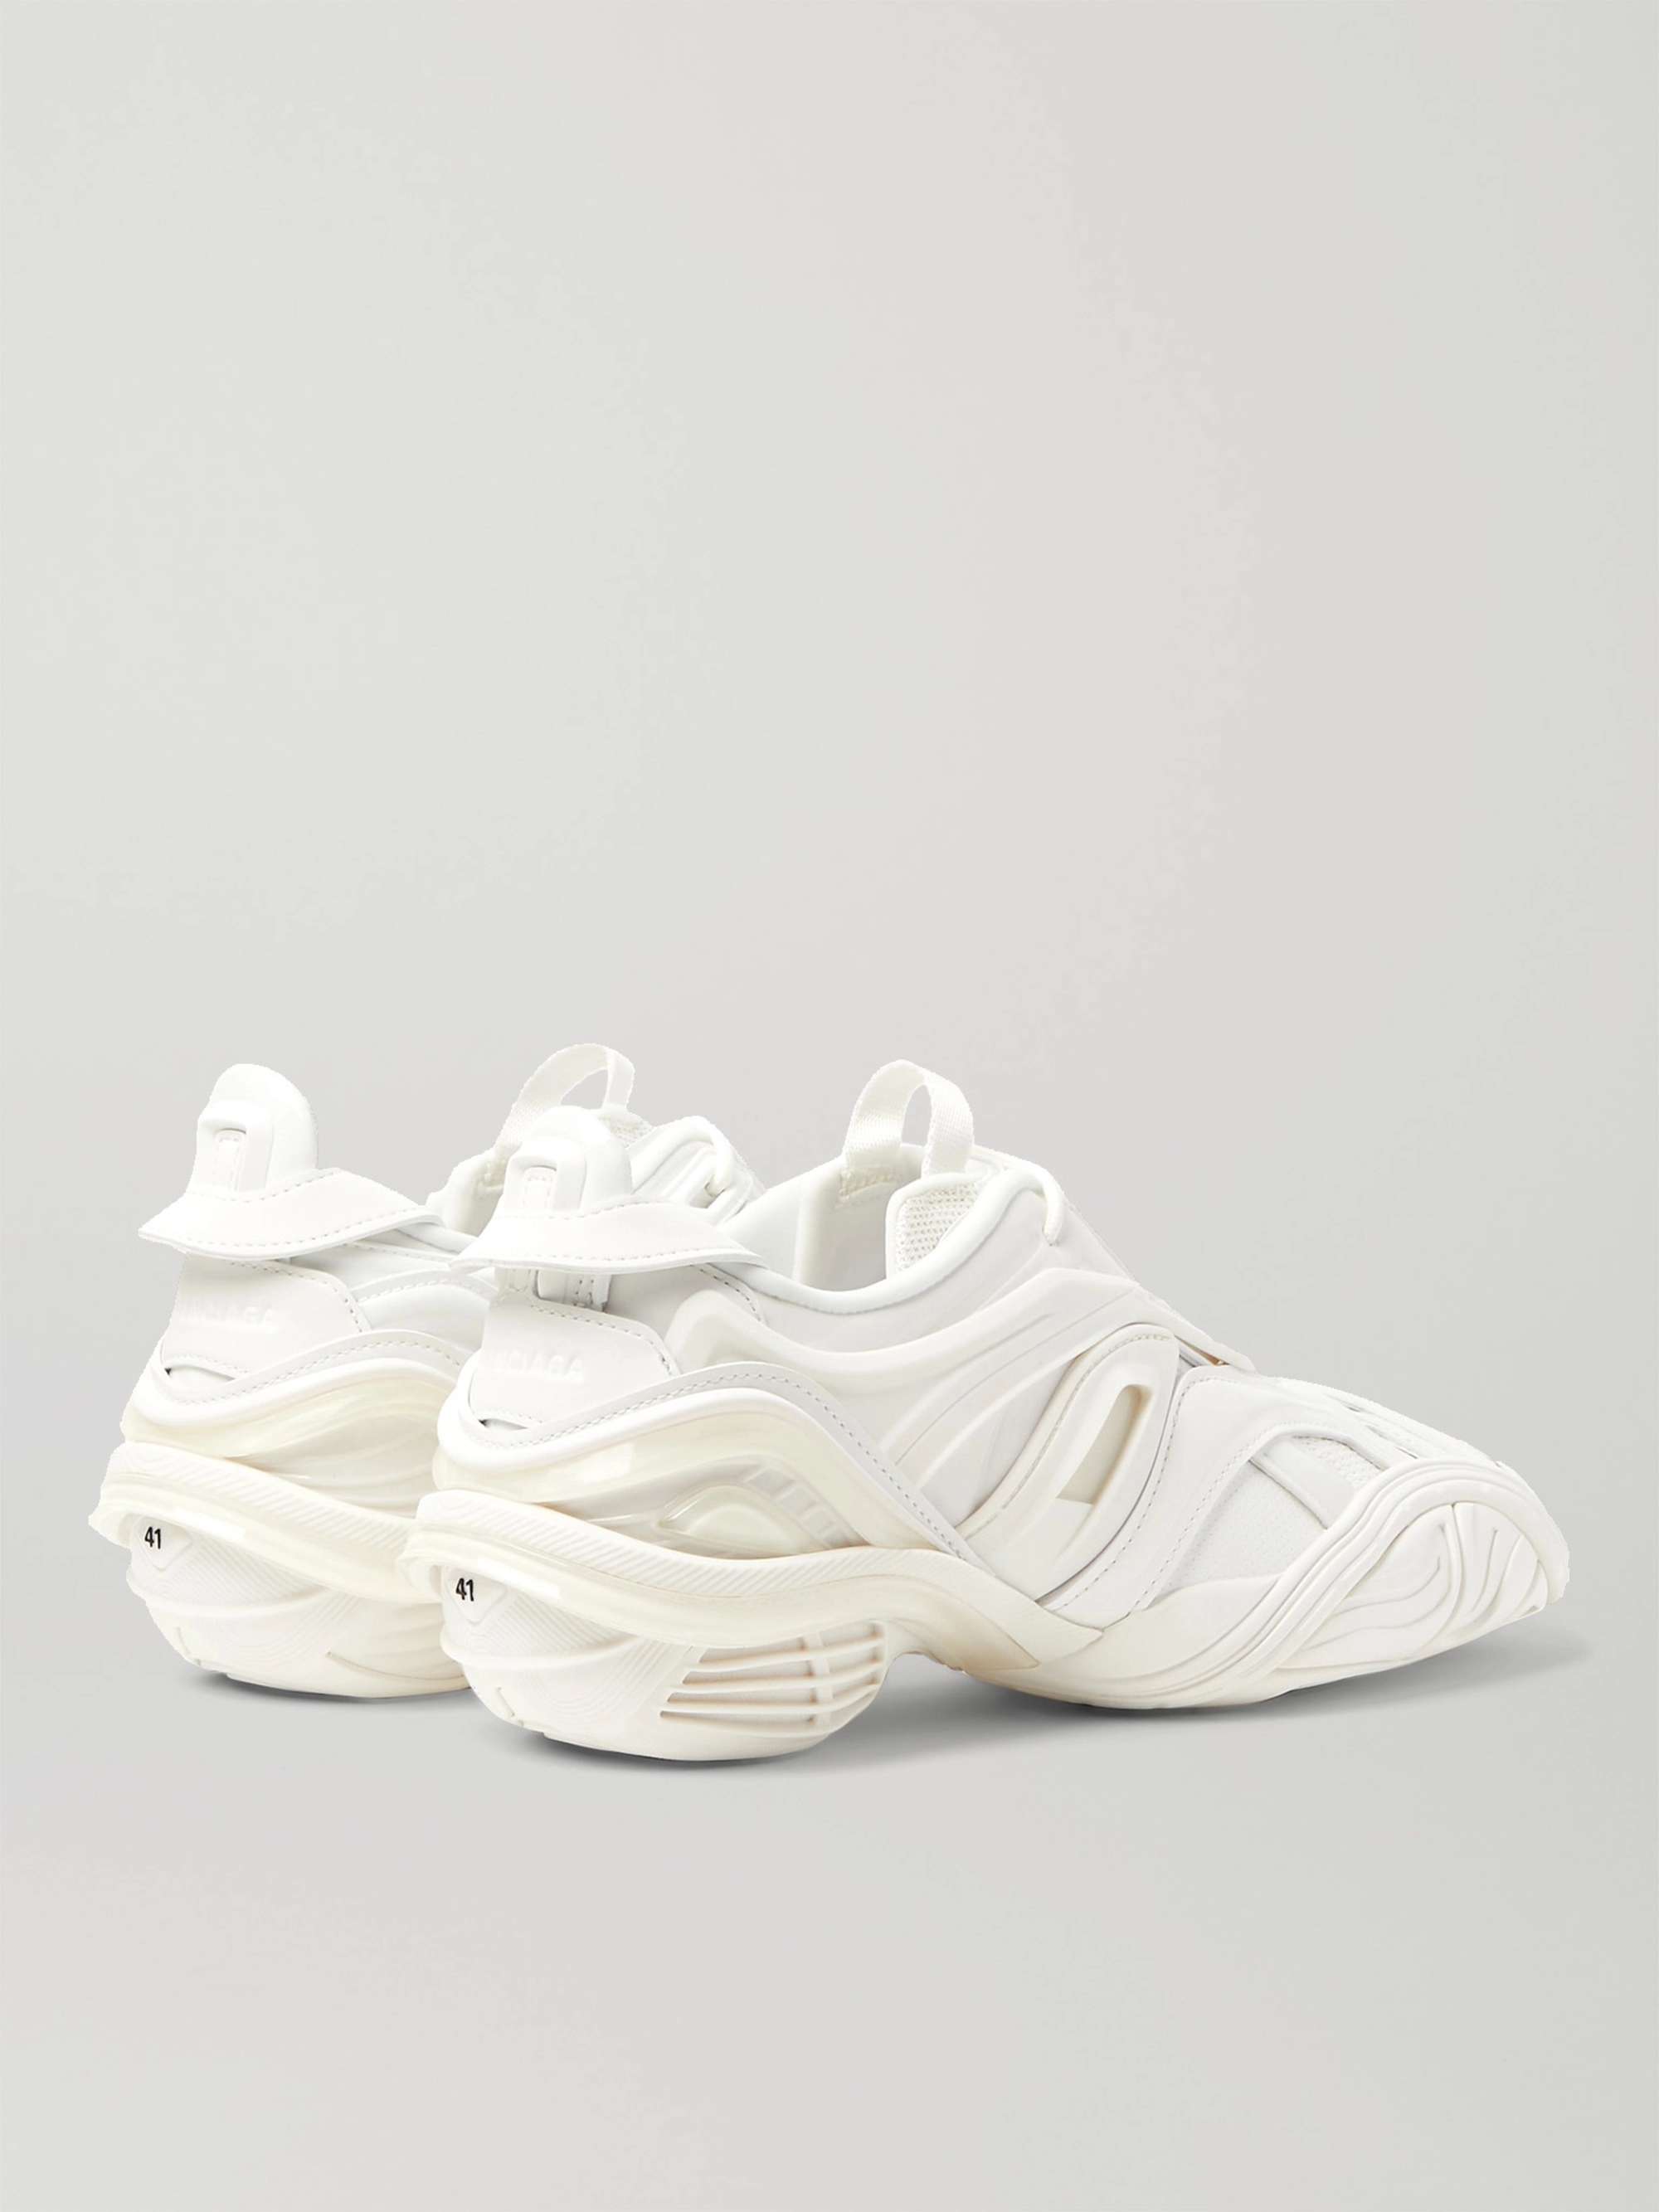 BALENCIAGA Tyrex Rubber, Mesh and Faux Leather Sneakers